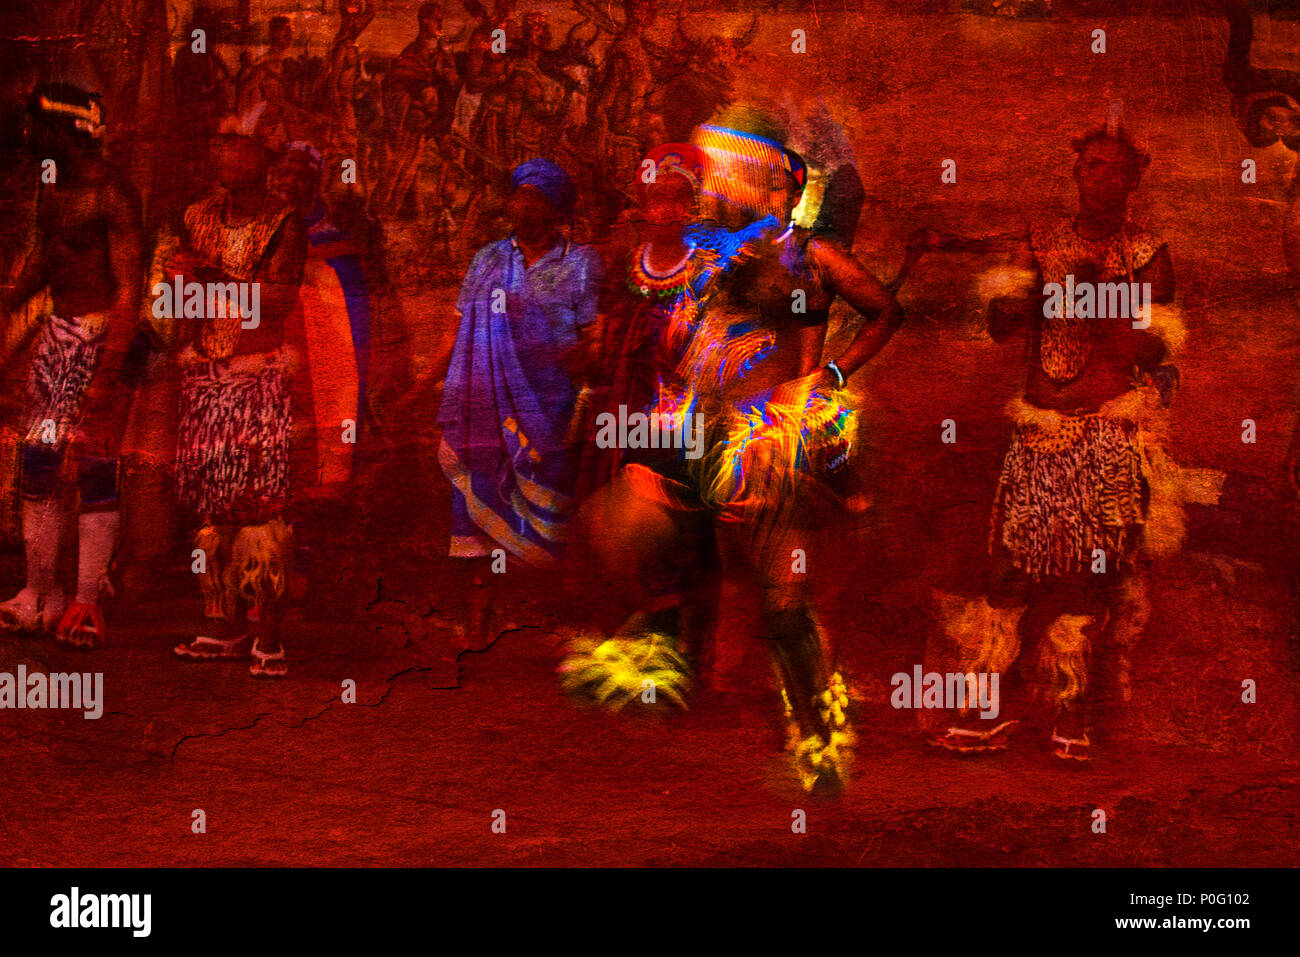 Brilliantly colored African Dancer Abstract in Motion and people in Native costume against a textured red background Stock Photo